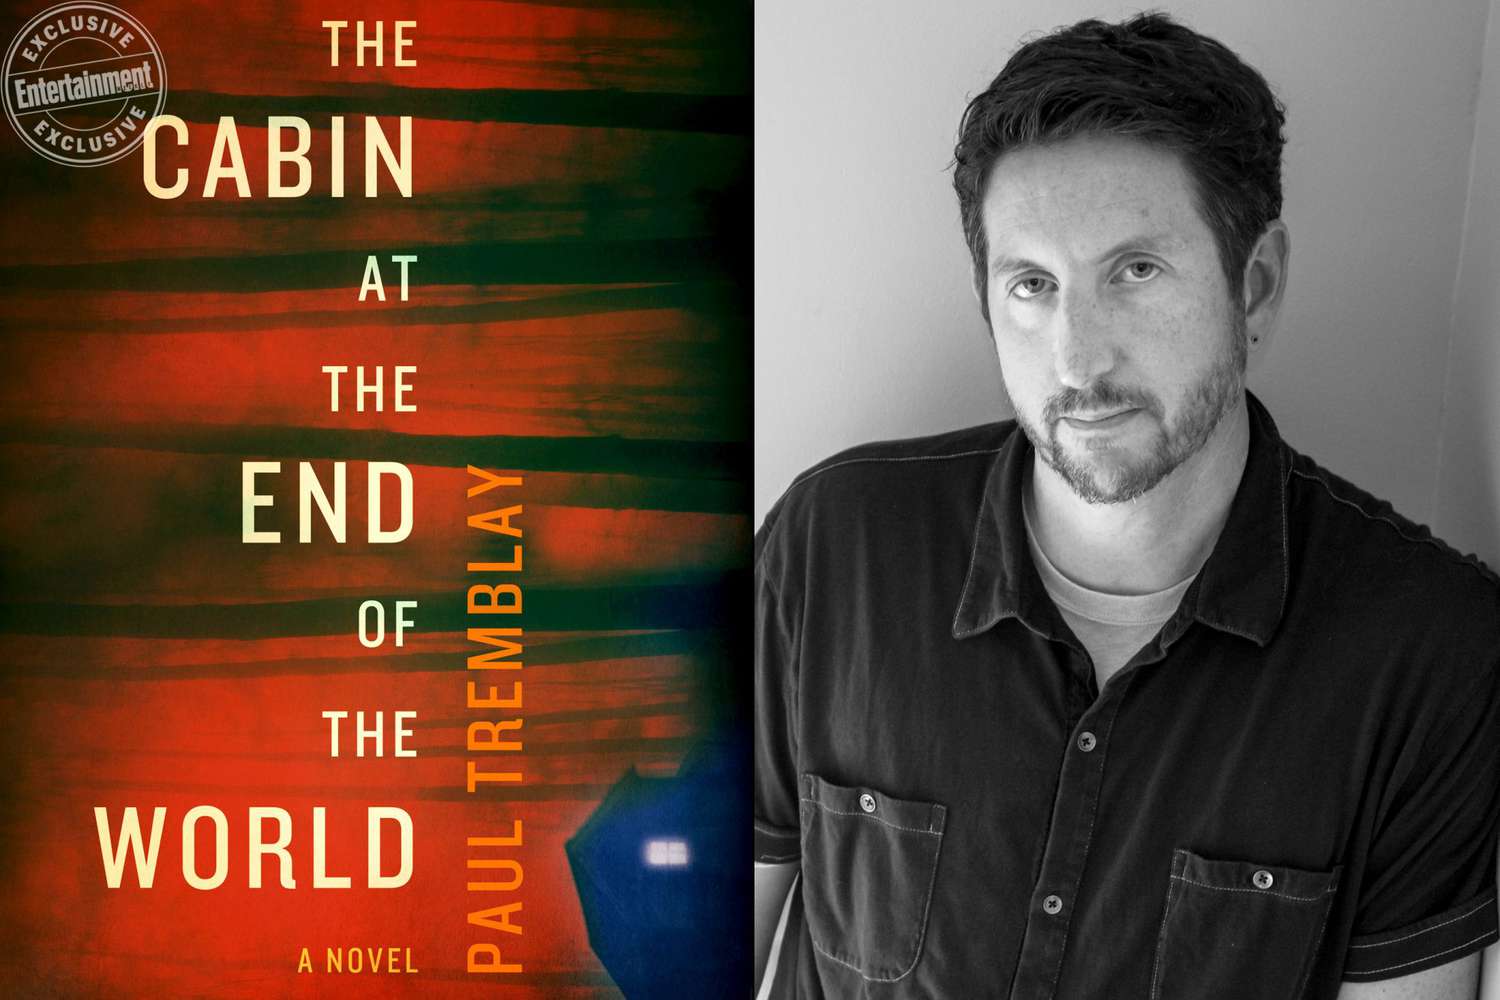 Classic water throw dust in eyes Paul Tremblay's 'The Cabin at the End of the World': Read an excerpt |  EW.com